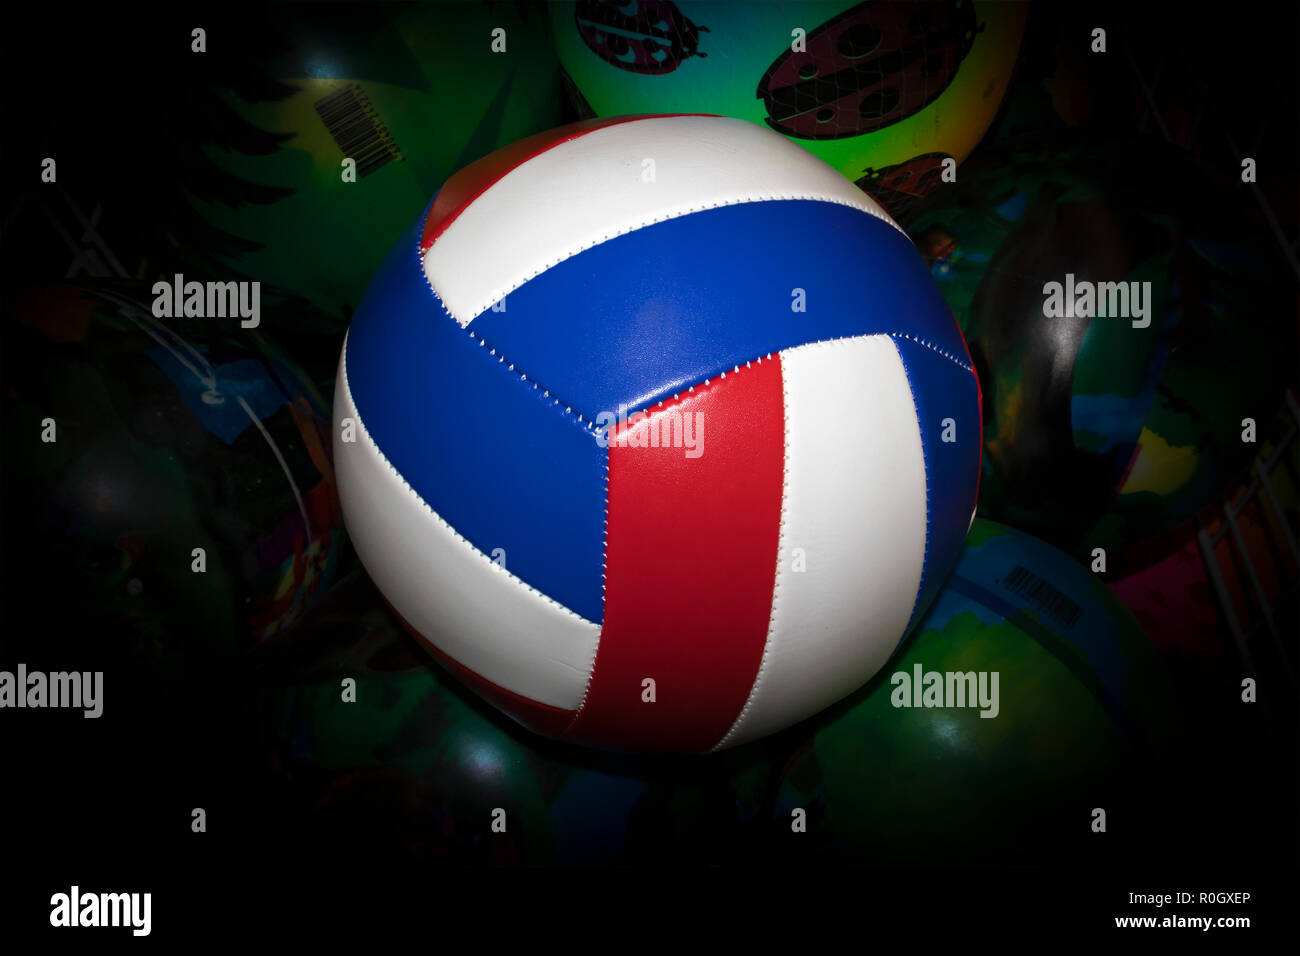 Striped volleyball ball against painted green balls with darkened vignette Stock Photo